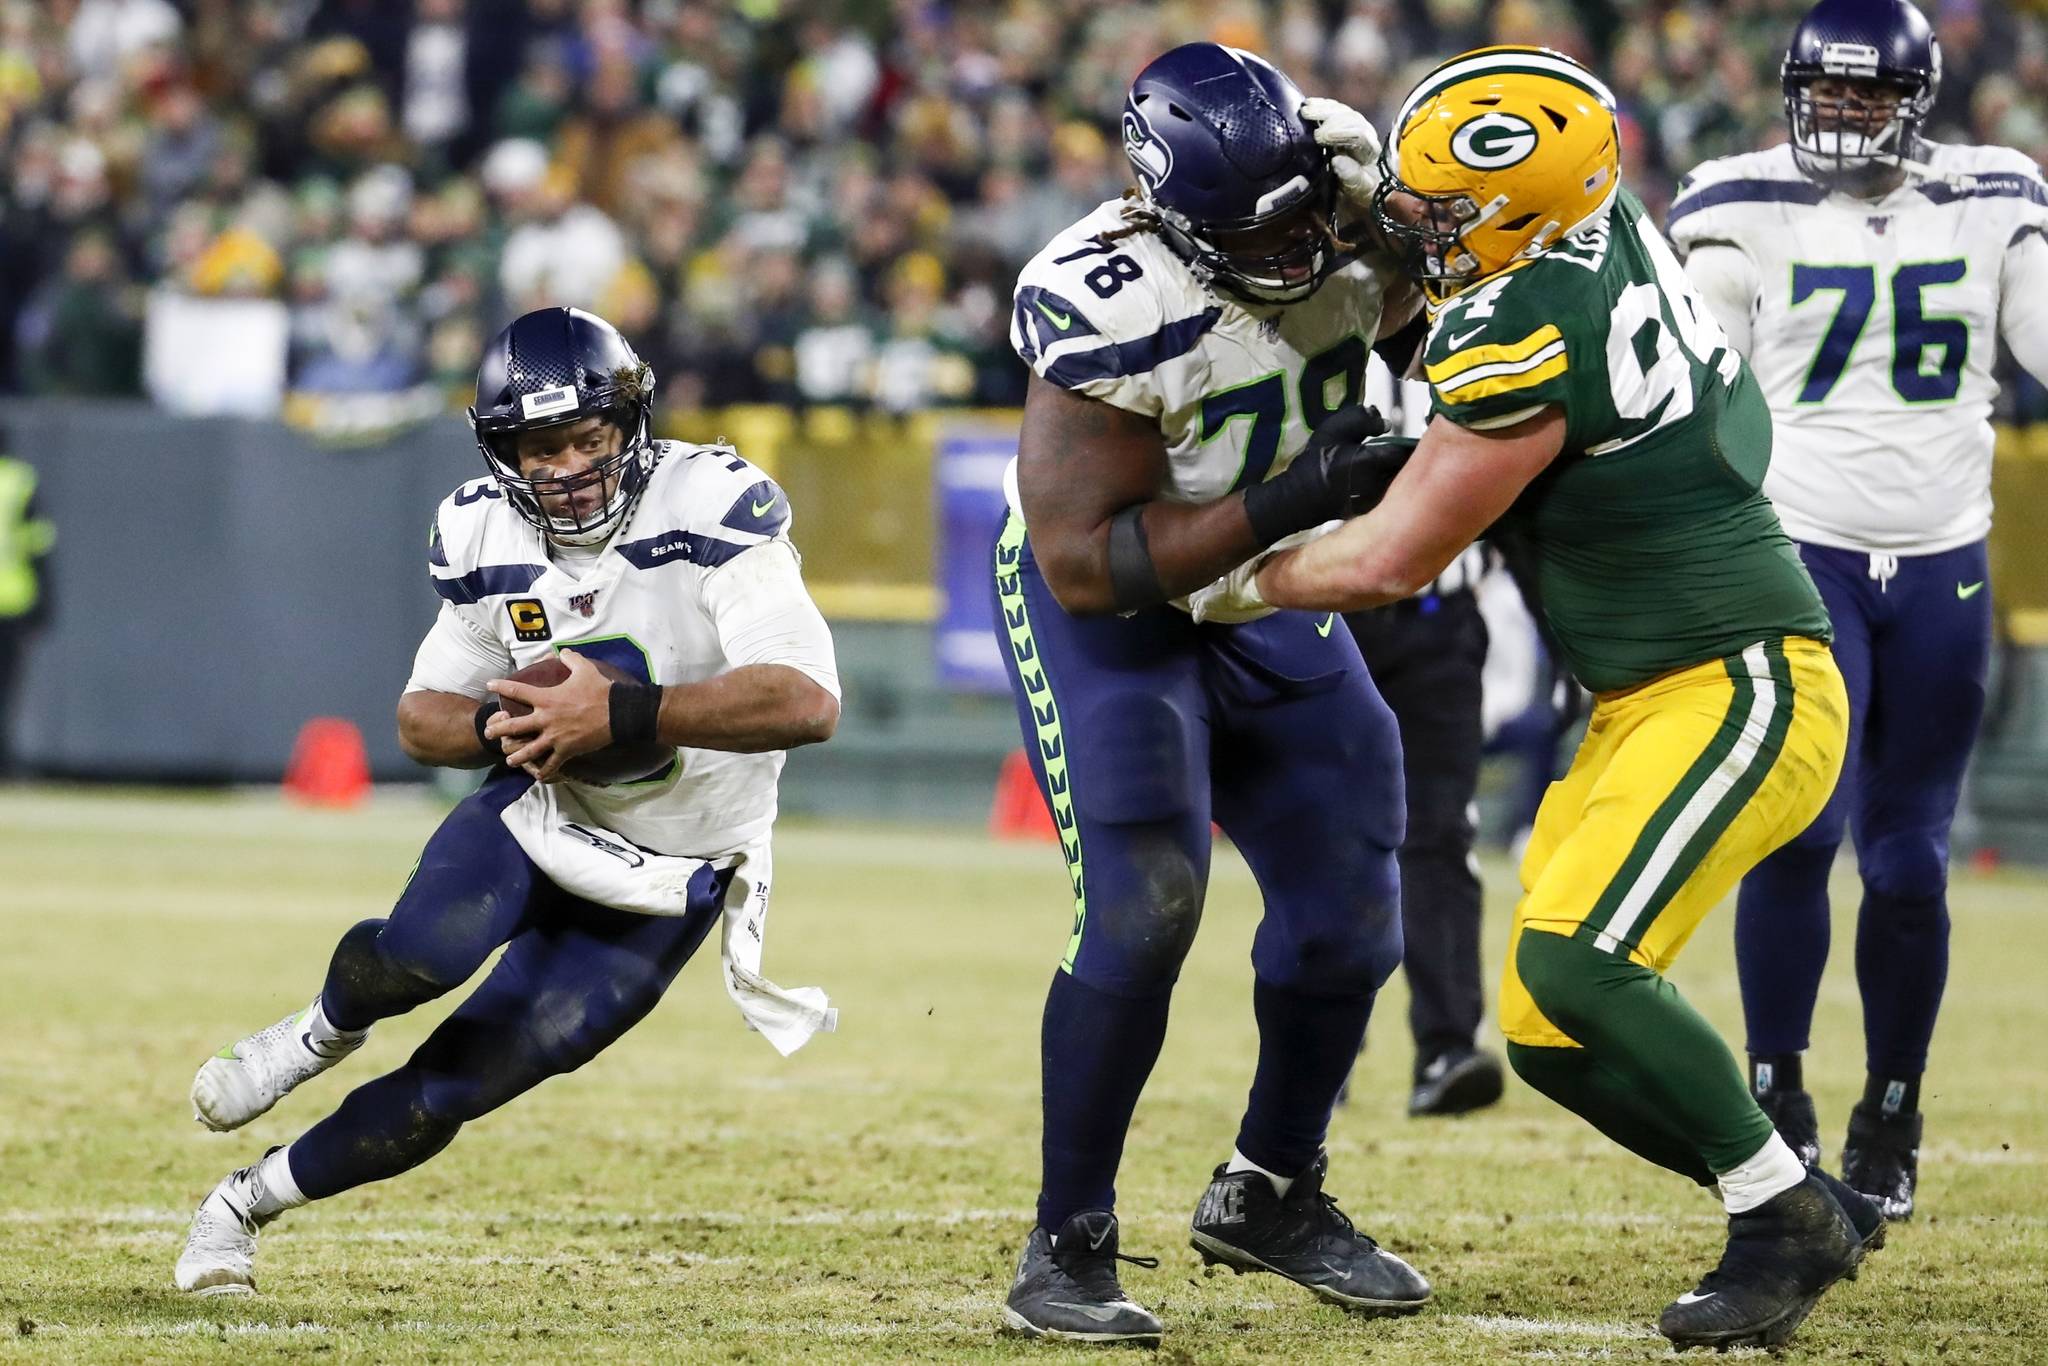 SEATTLE SEAHAWKS: Packers hang on, season comes to an end for Hawks at Lambeau | Peninsula Daily News